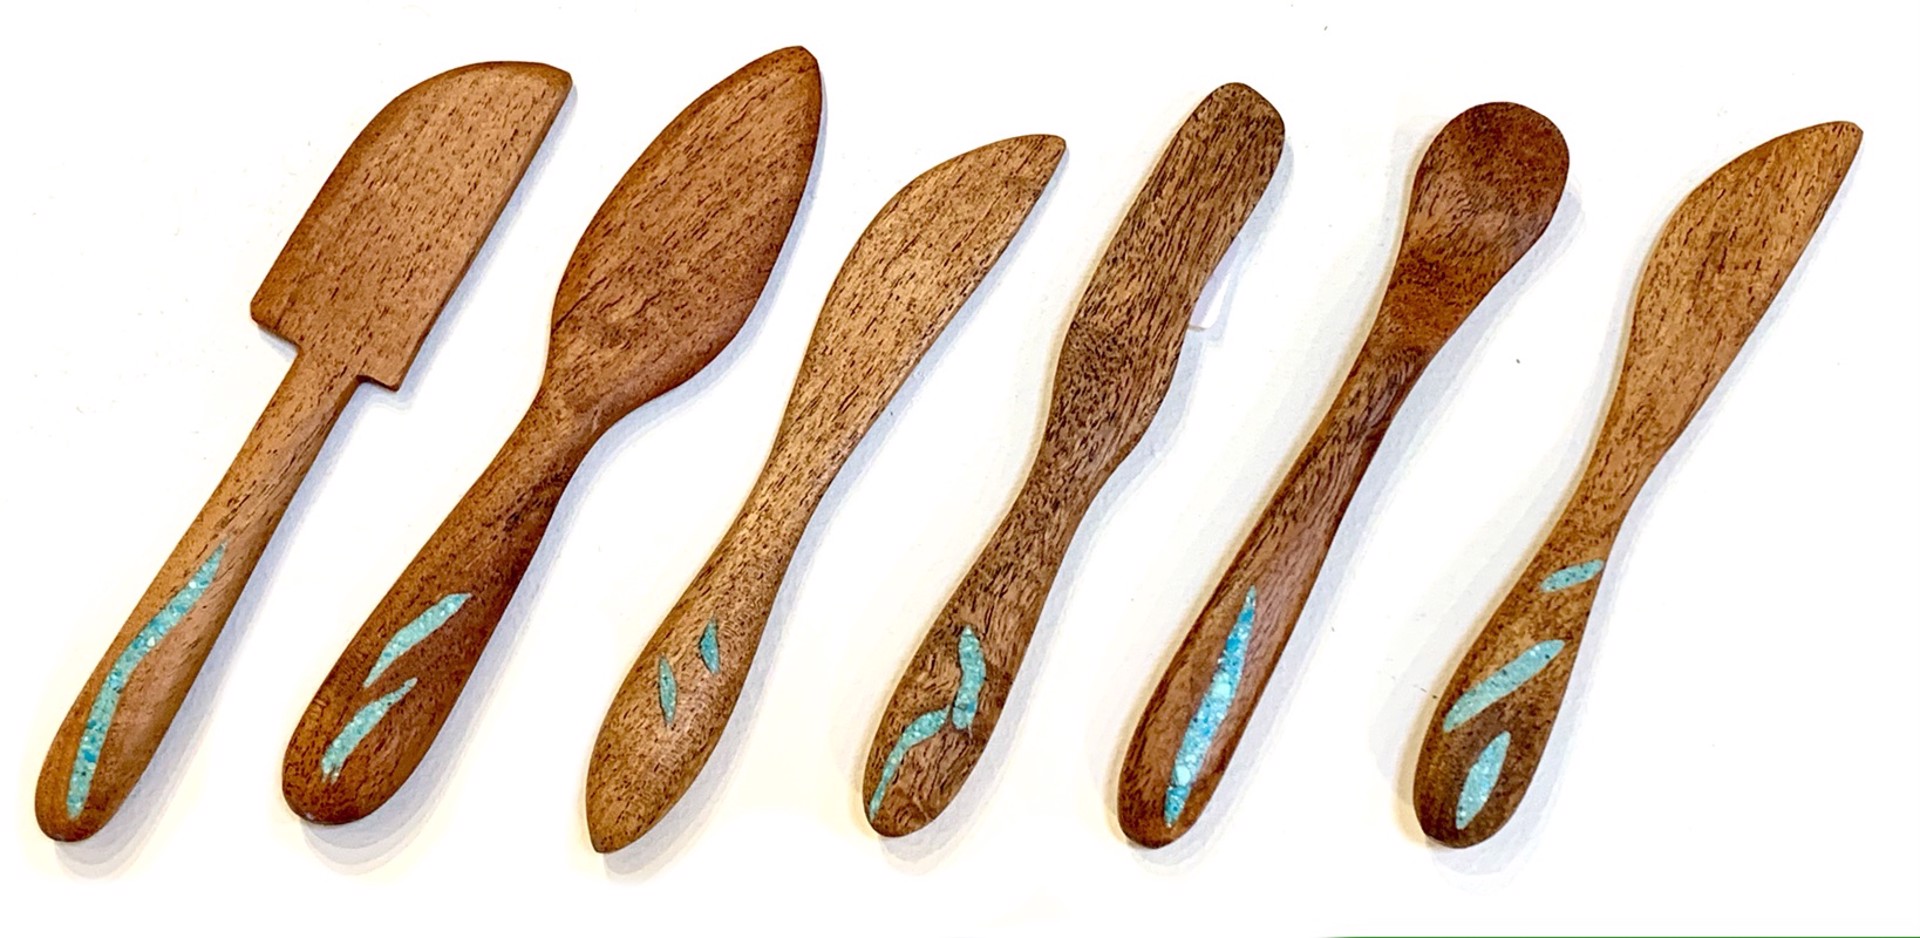 Utensil - Butter Spreaders - Assorted Mesquite with Inlay by TreeStump Woodcraft